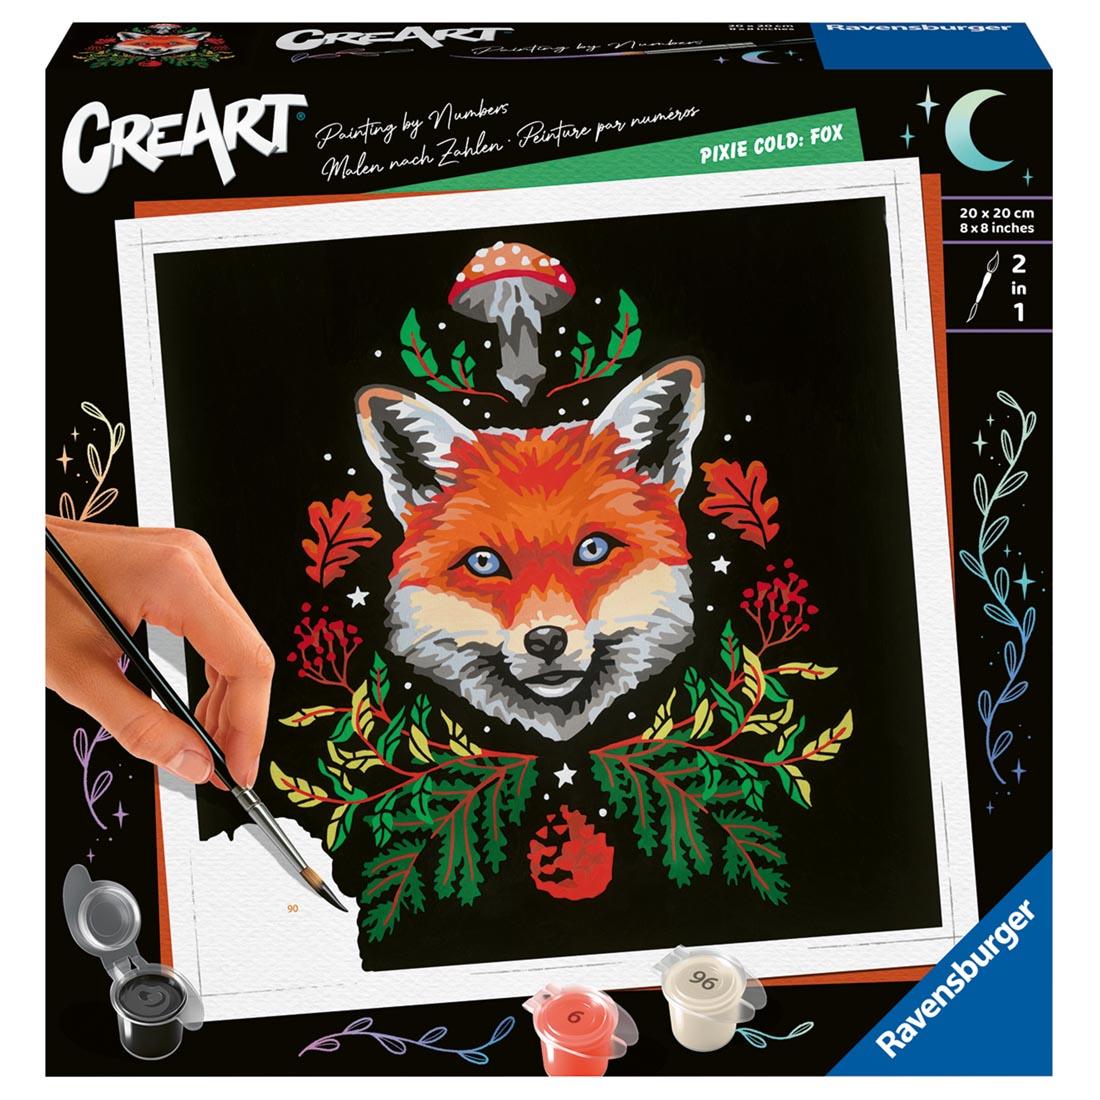 Pixie Cold: Fox Adult Paint By Number Set By Ravensburger